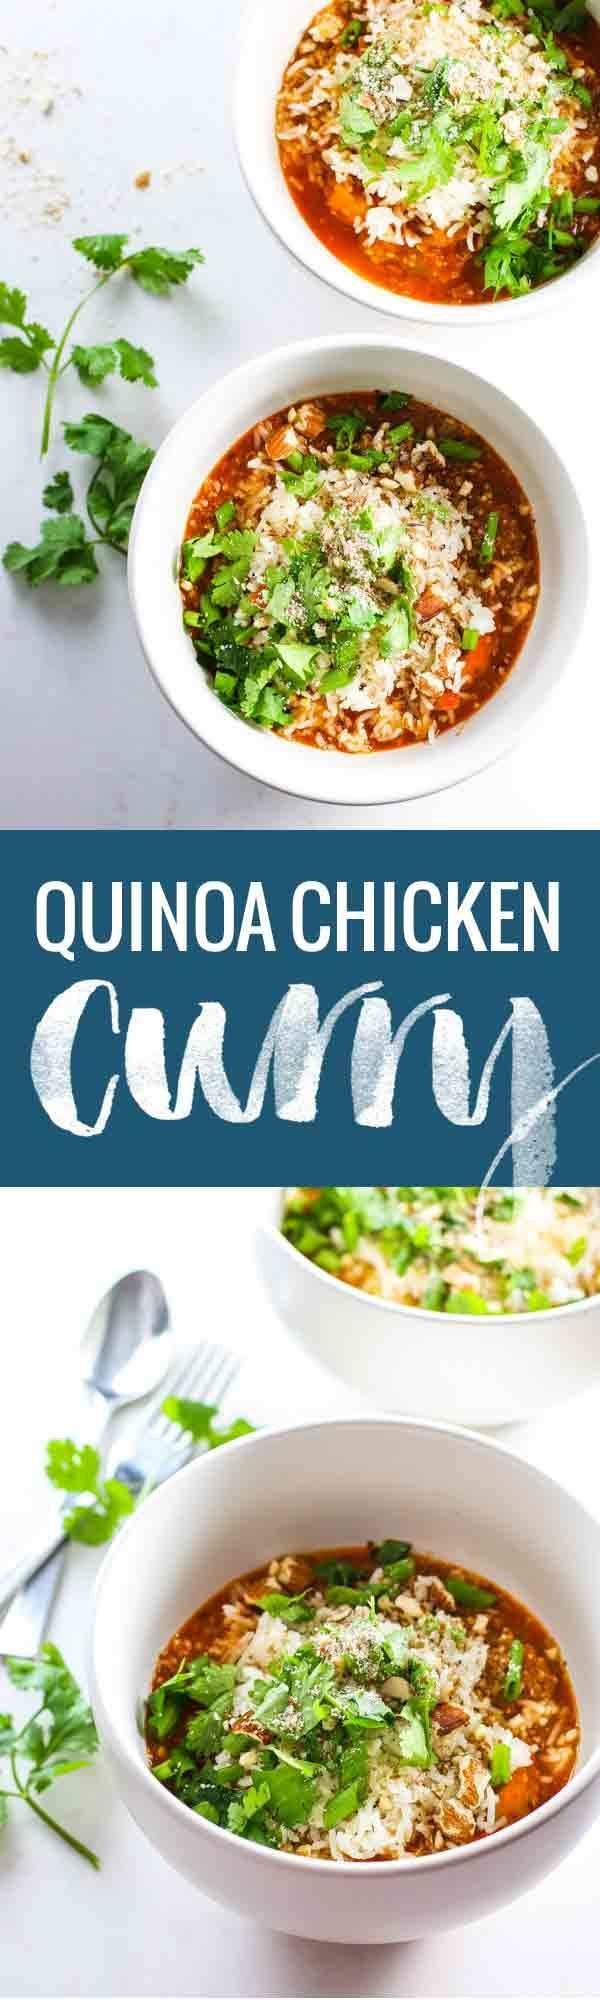 Healthy Quinoa Chicken Curry Bowls - simple, vibrant, spicy, and adaptable to any ingredients you have on hand! 300 calories.